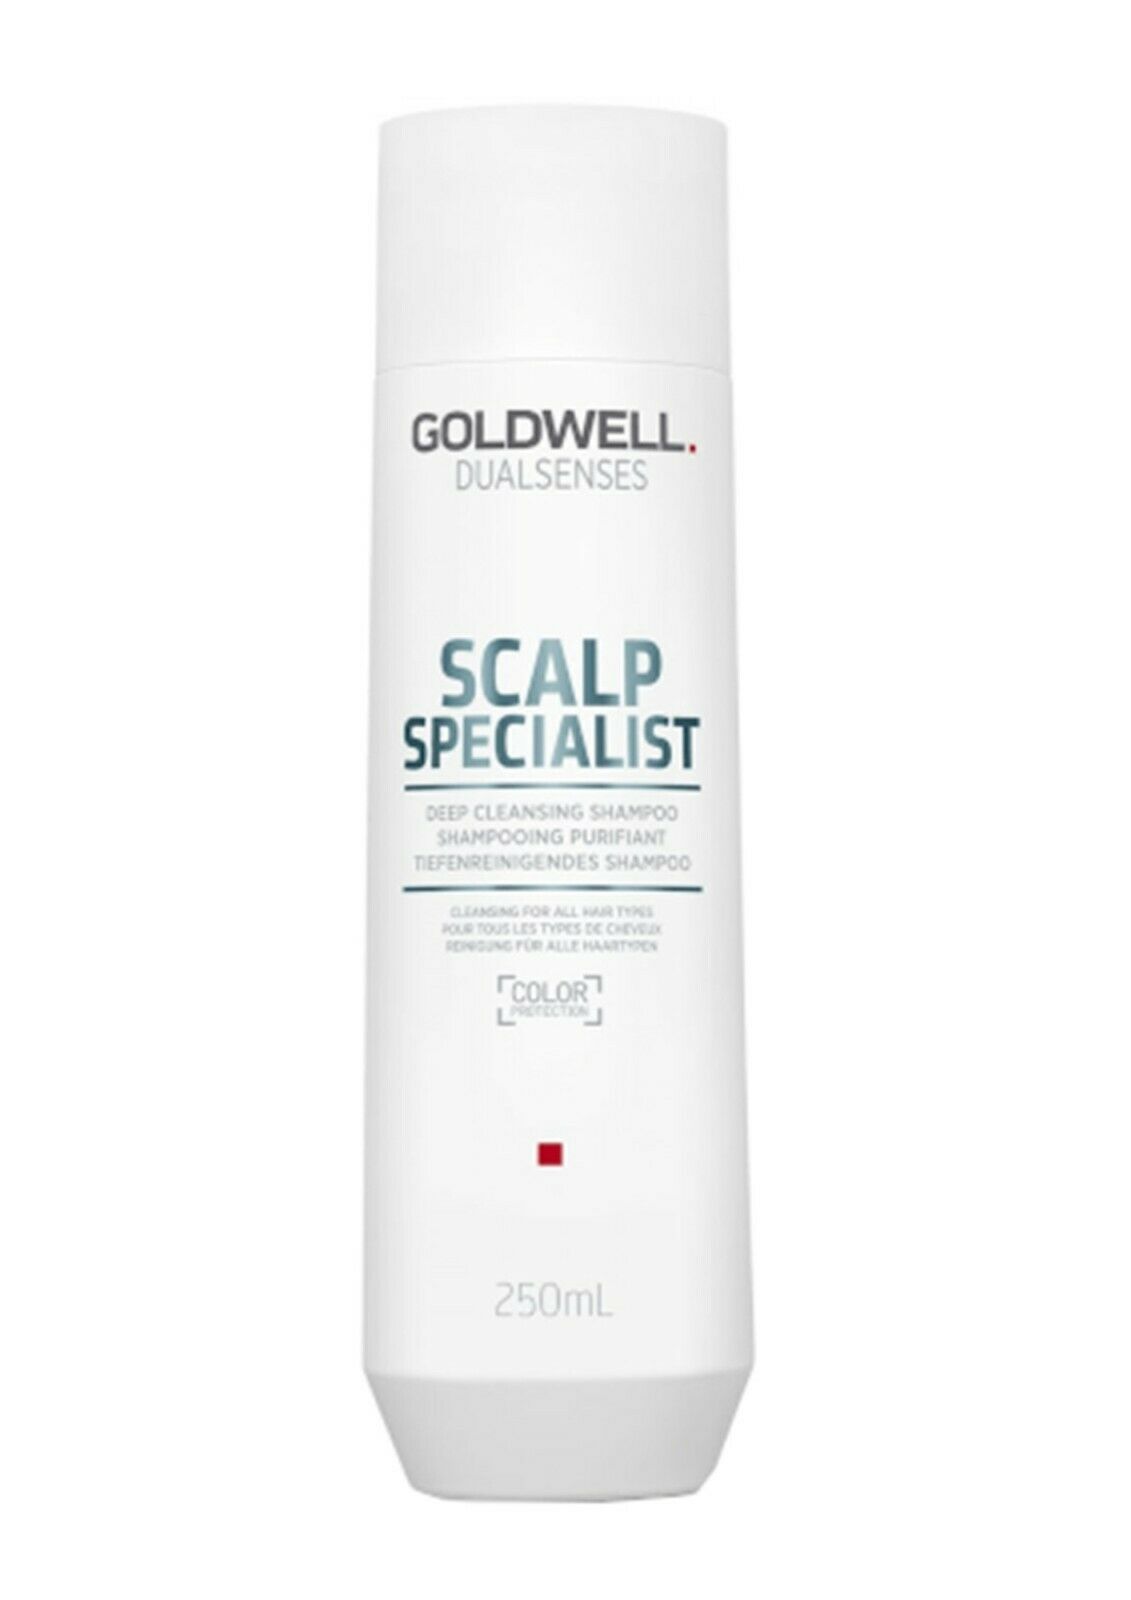 iaahhaircare,Goldwell Dual Senses Scalp Specialist Deep Cleansing Shampoo 250ml,Shampoos & Conditioners,Goldwell